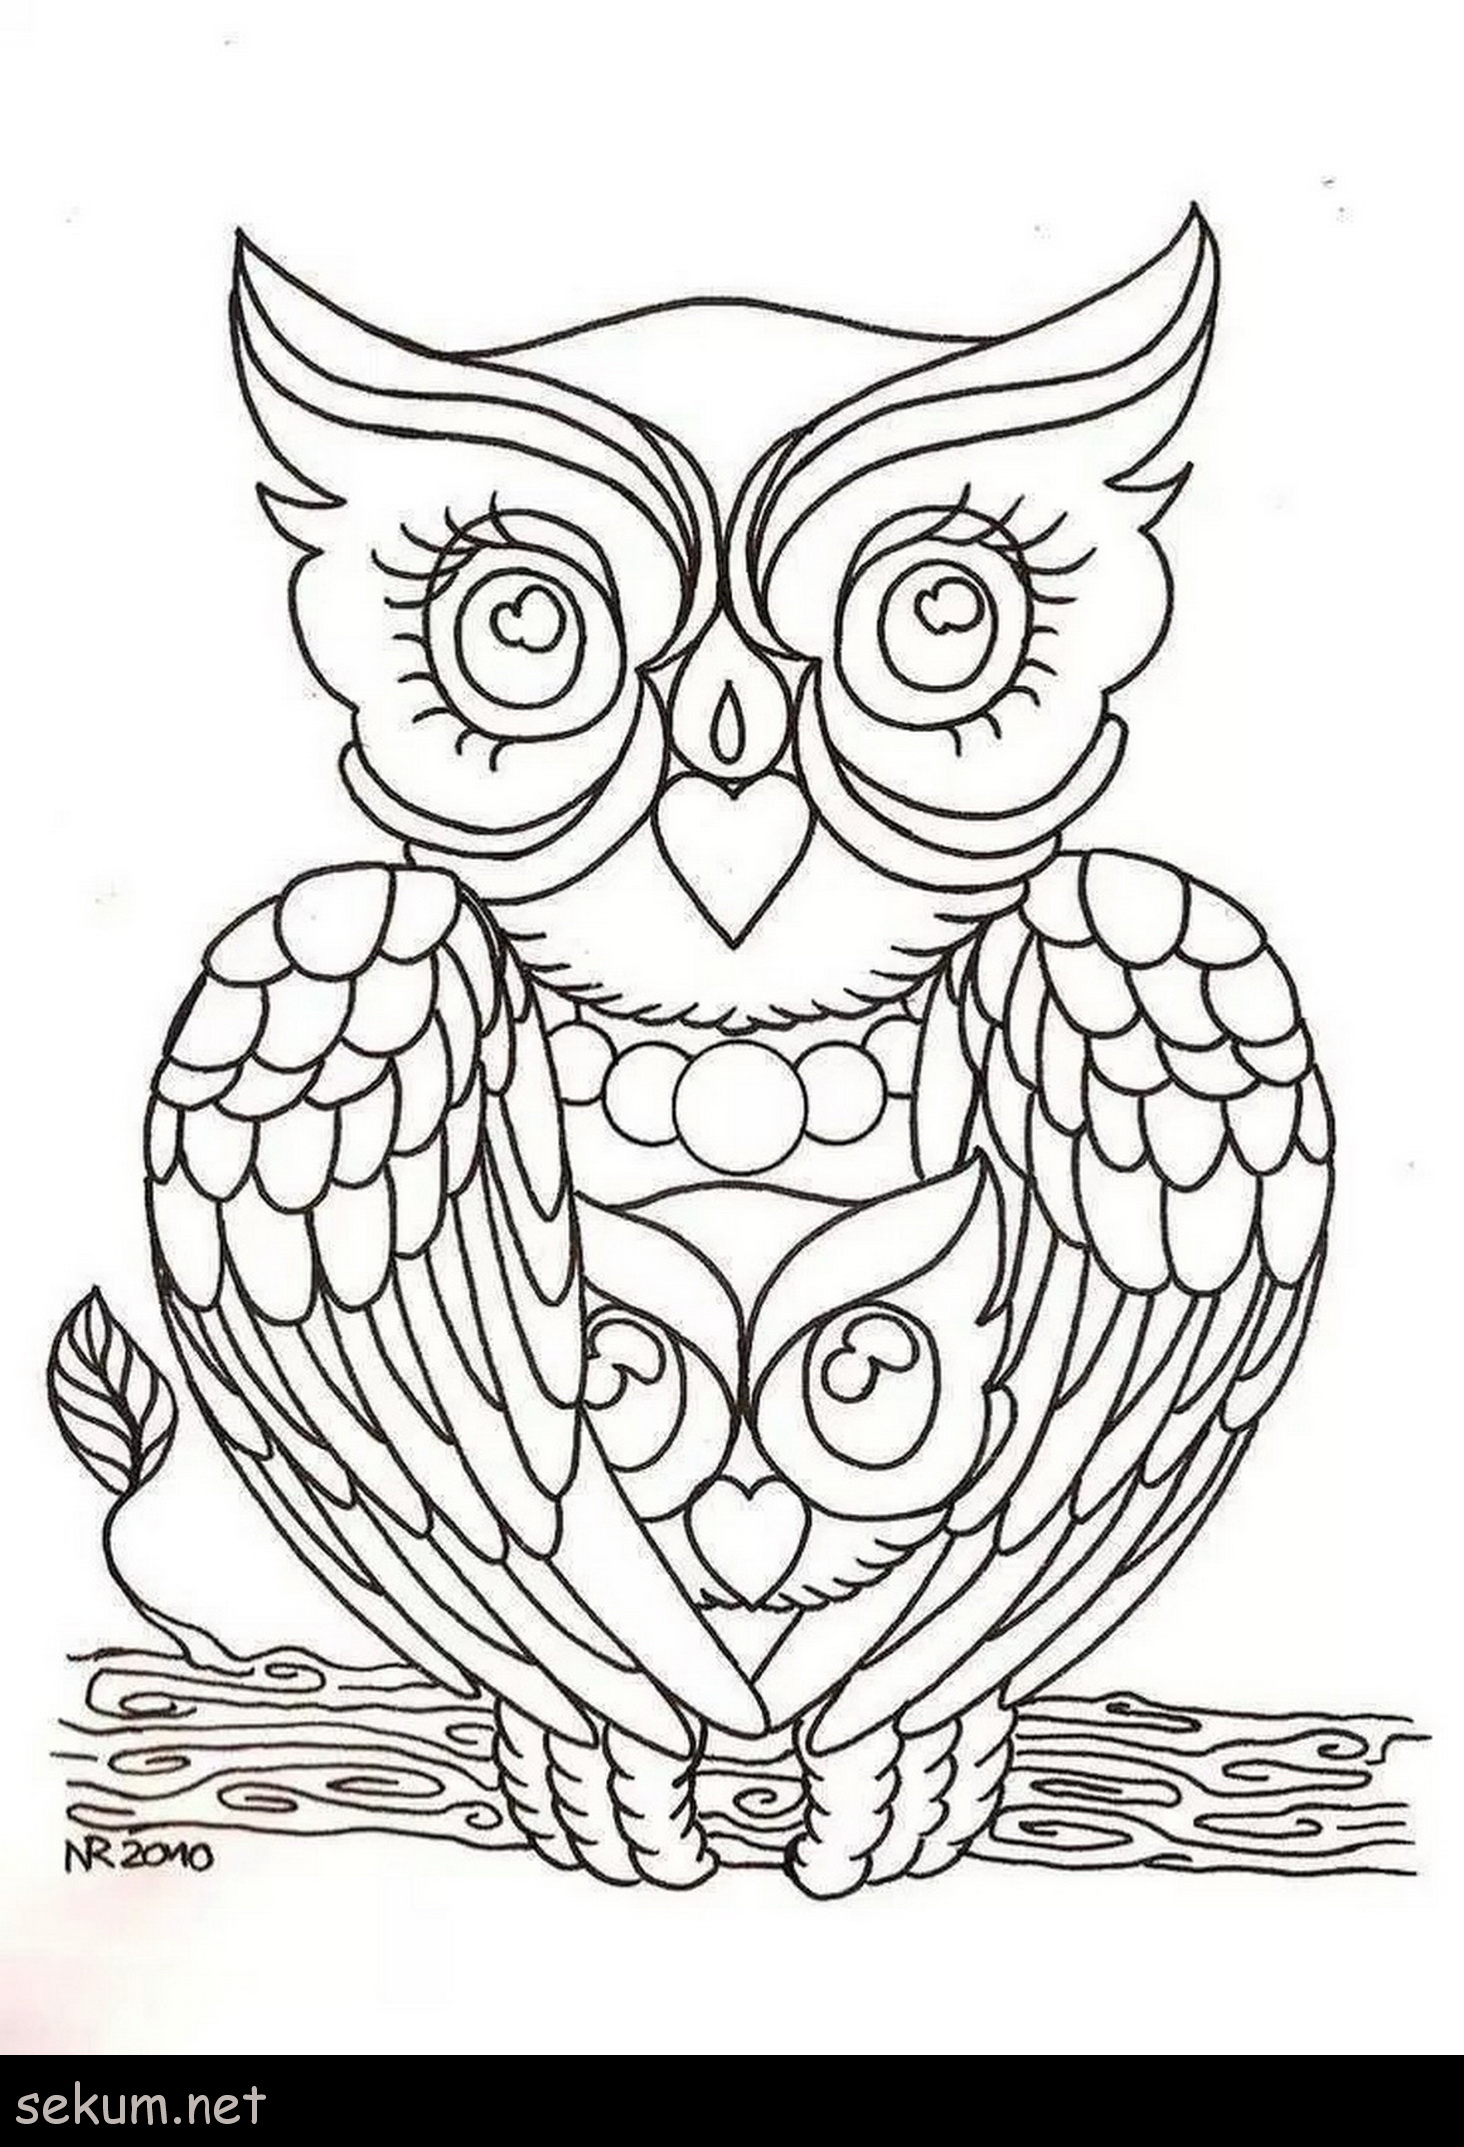 Coloring Book : Cute Owlloring Pages For Kids Printable ...